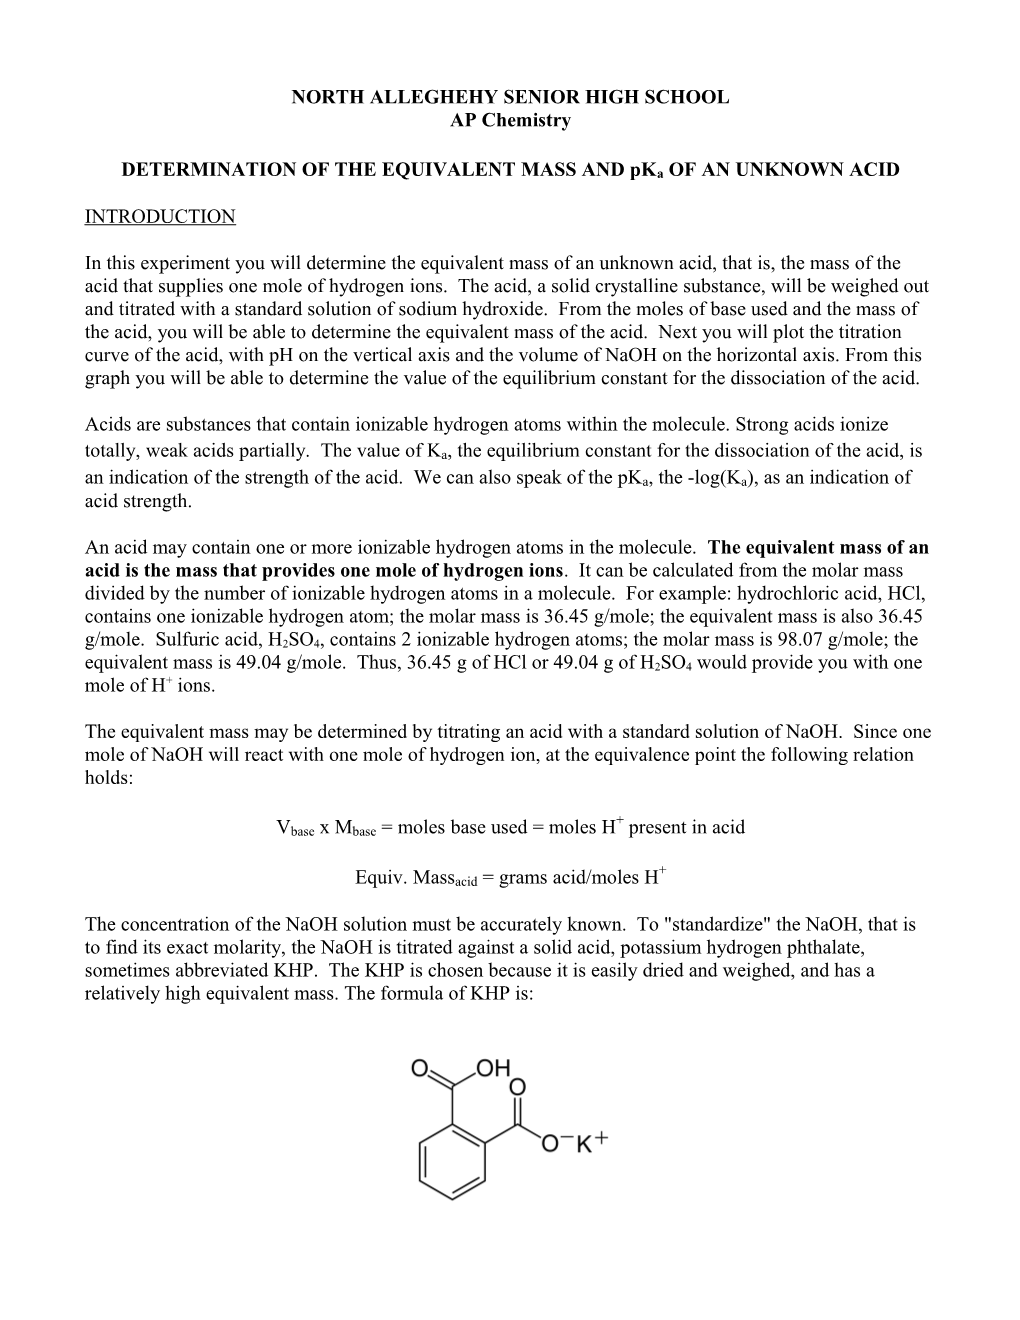 DETERMINATION of the EQUIVALENT MASS and Pkaof an UNKNOWN ACID